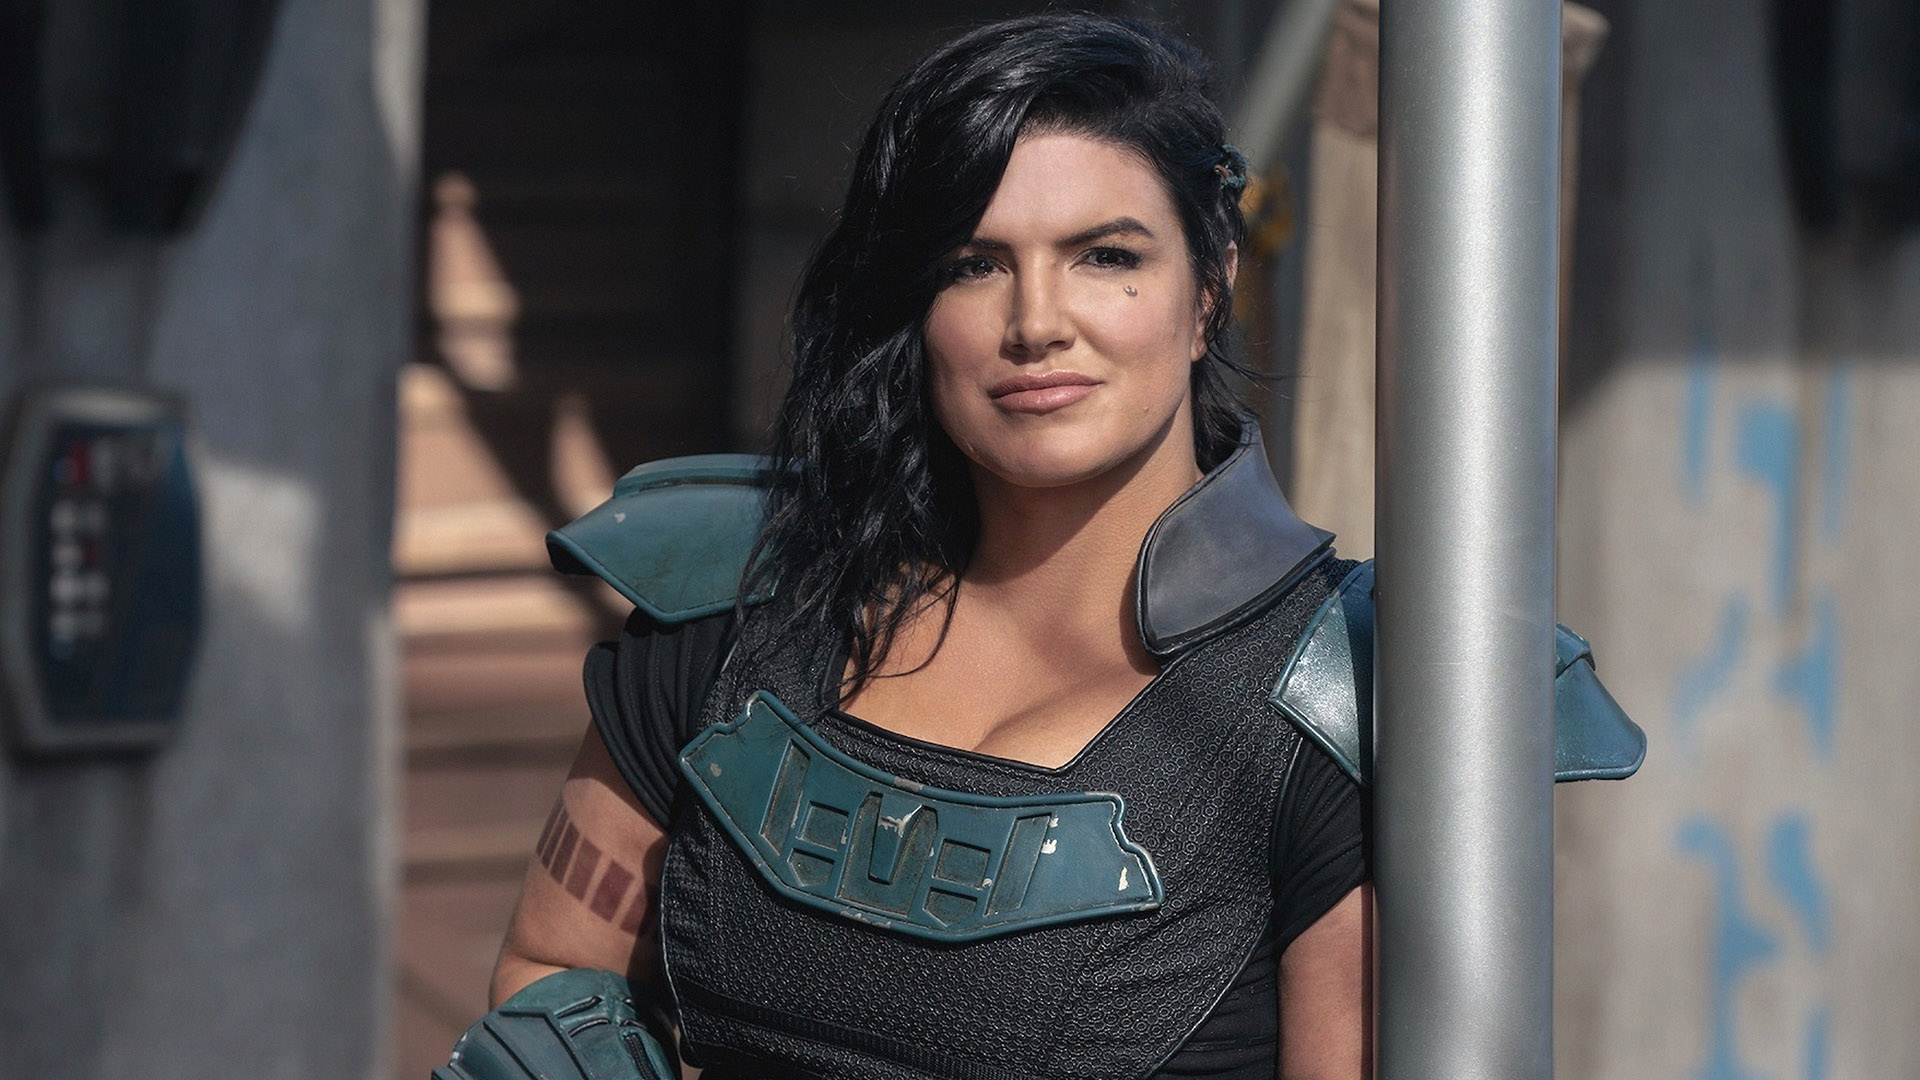 Whatever Happened to Gina Carano After She Got Blacklisted From Hollywood?